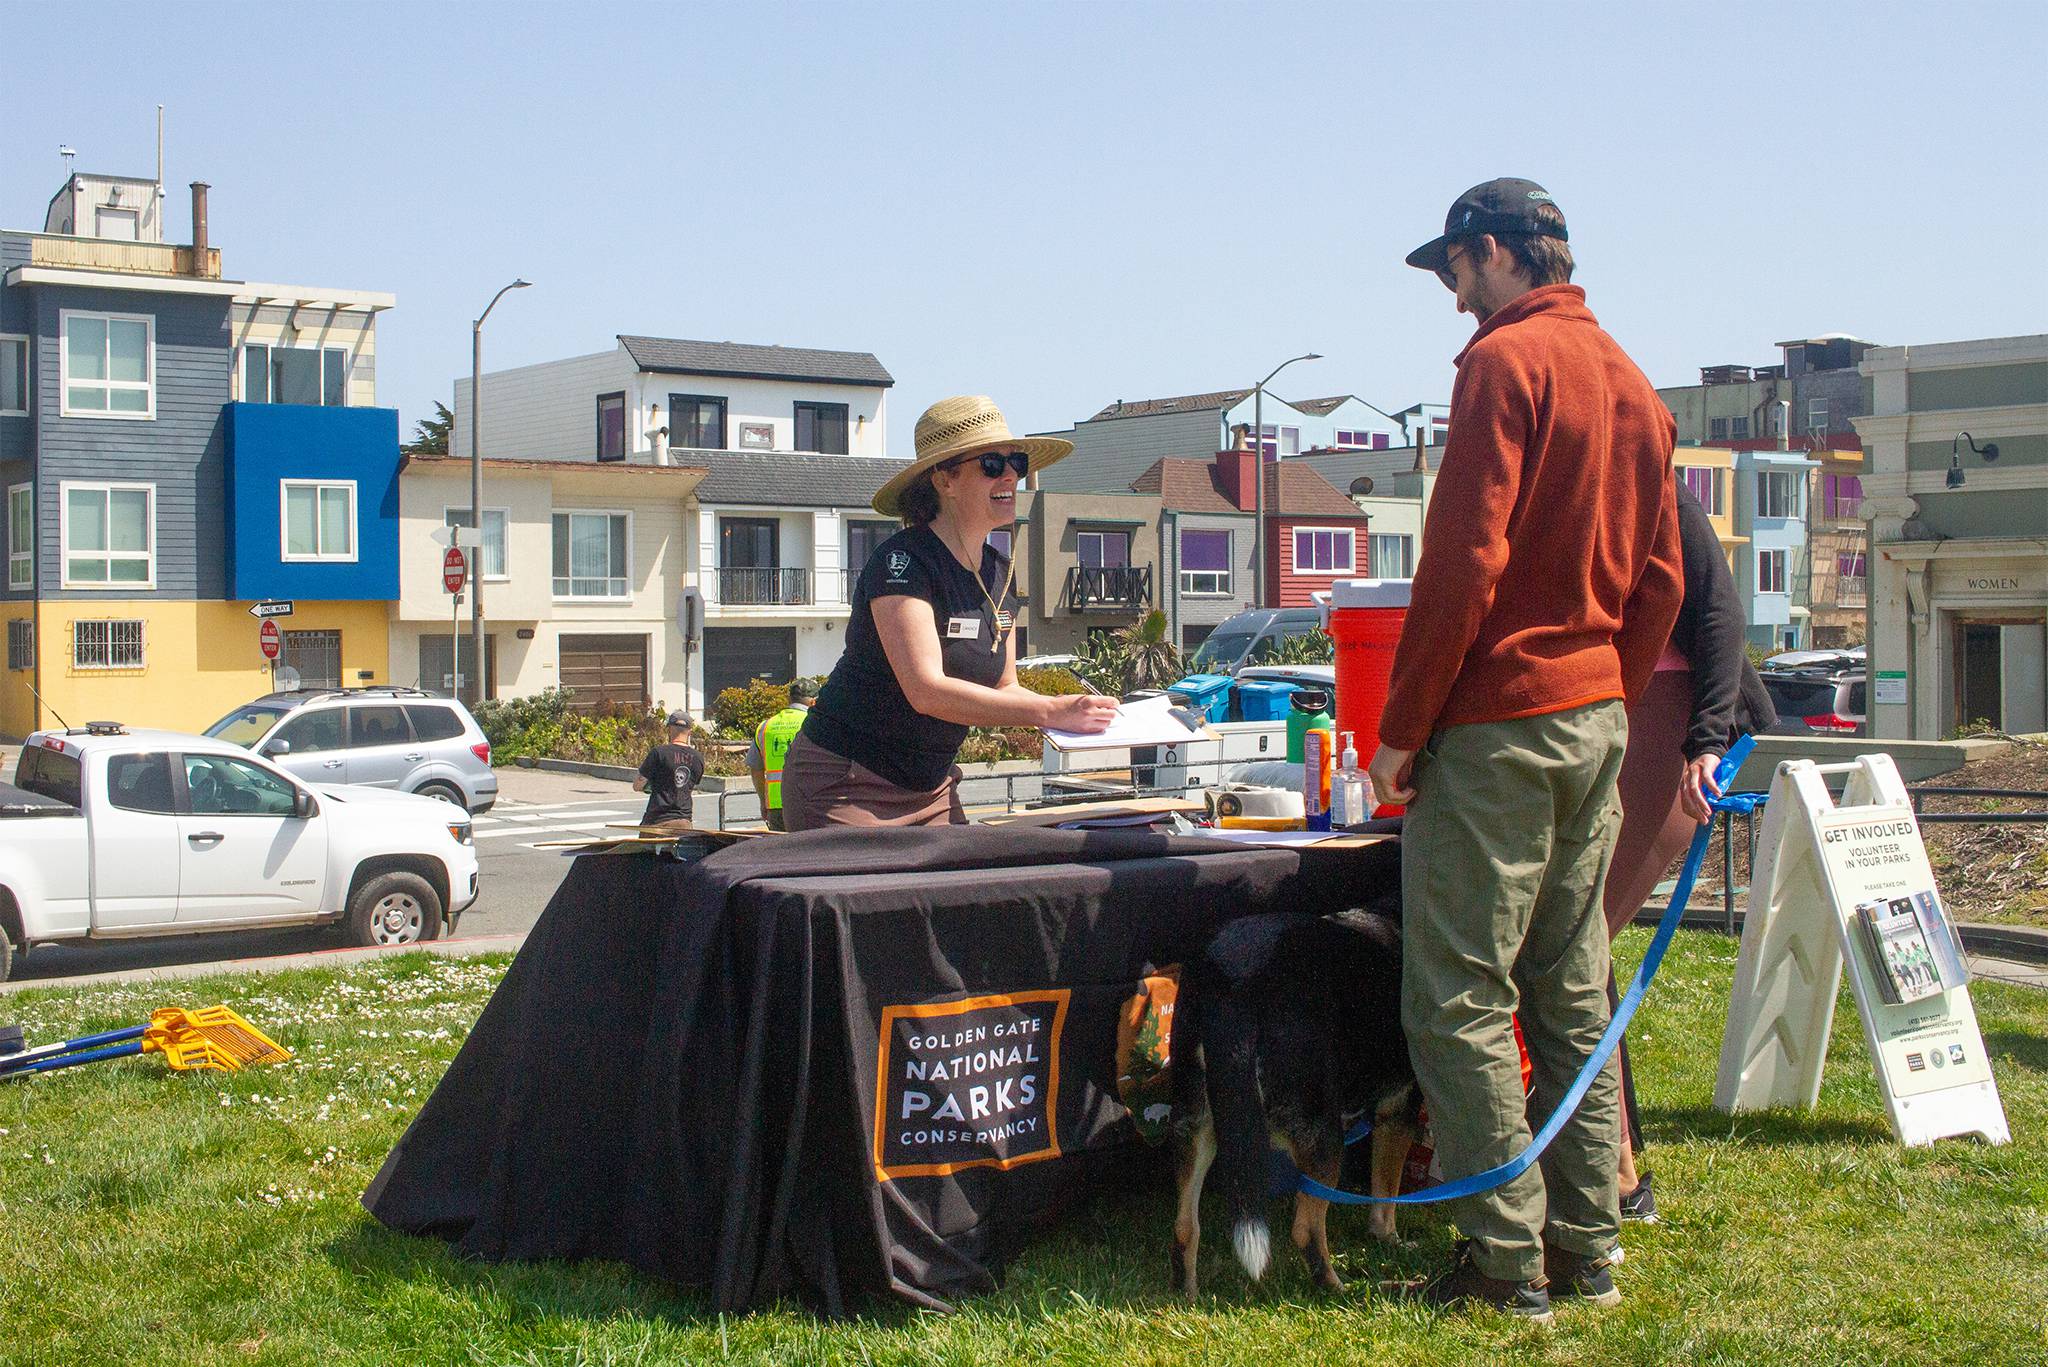 Standing behind a GGNPC table on the grass at Crissy Field, a smiling female volunteer in straw hat and sunglasses holds a clipboard and speaks to a couple and their dog